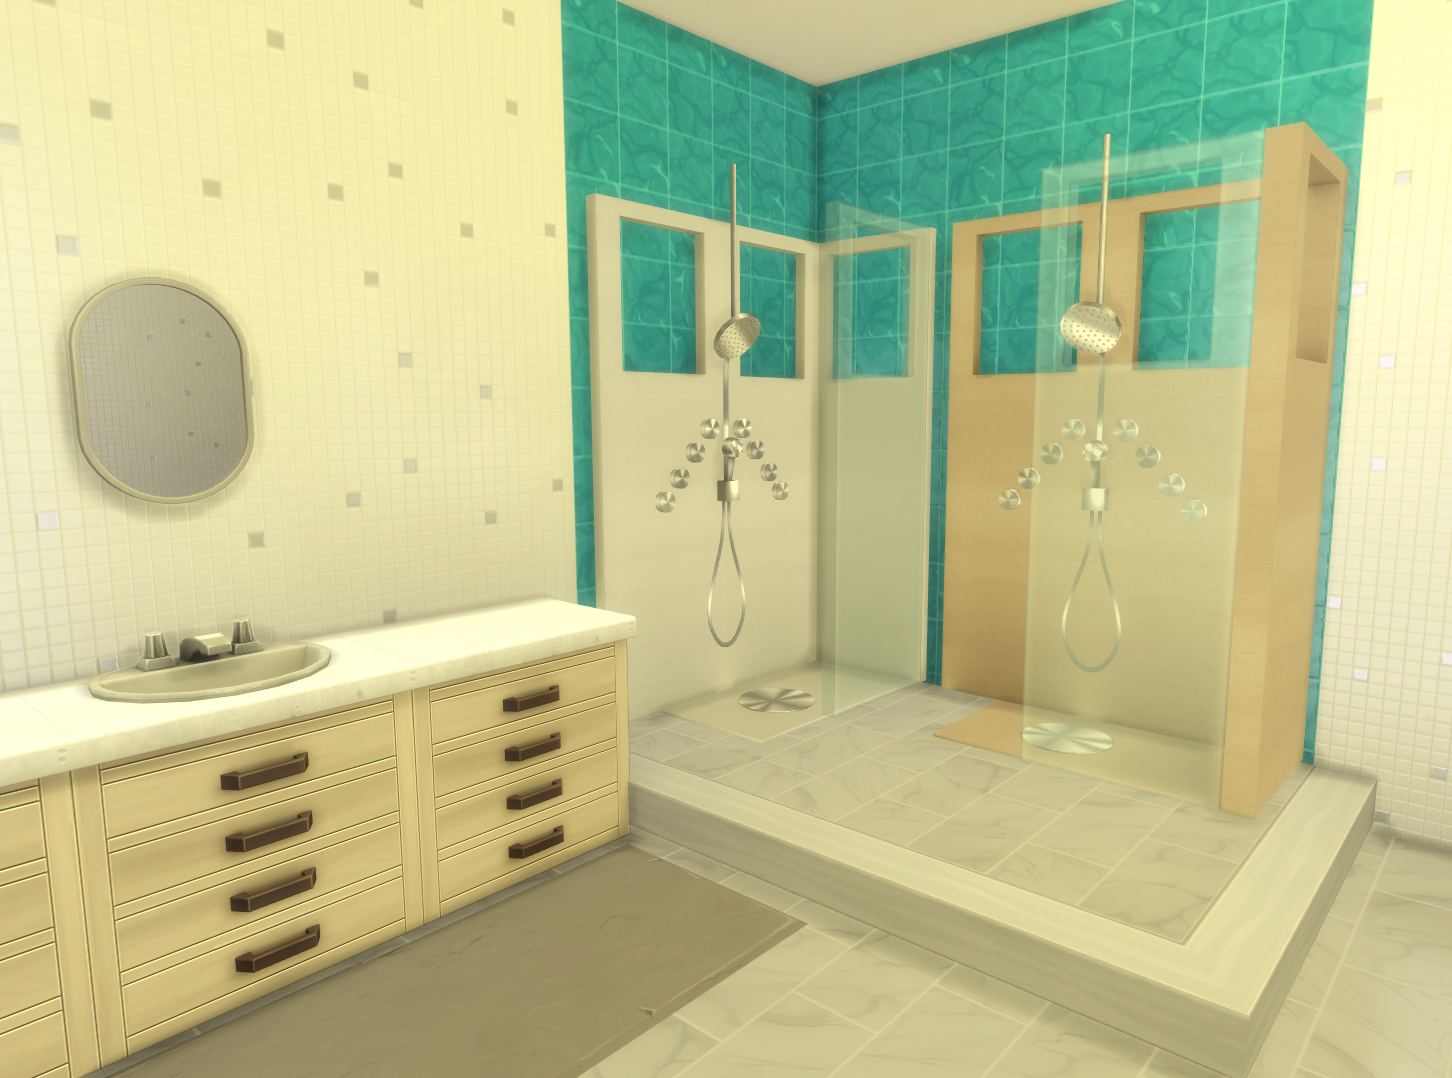 Sims 4 shower together mod